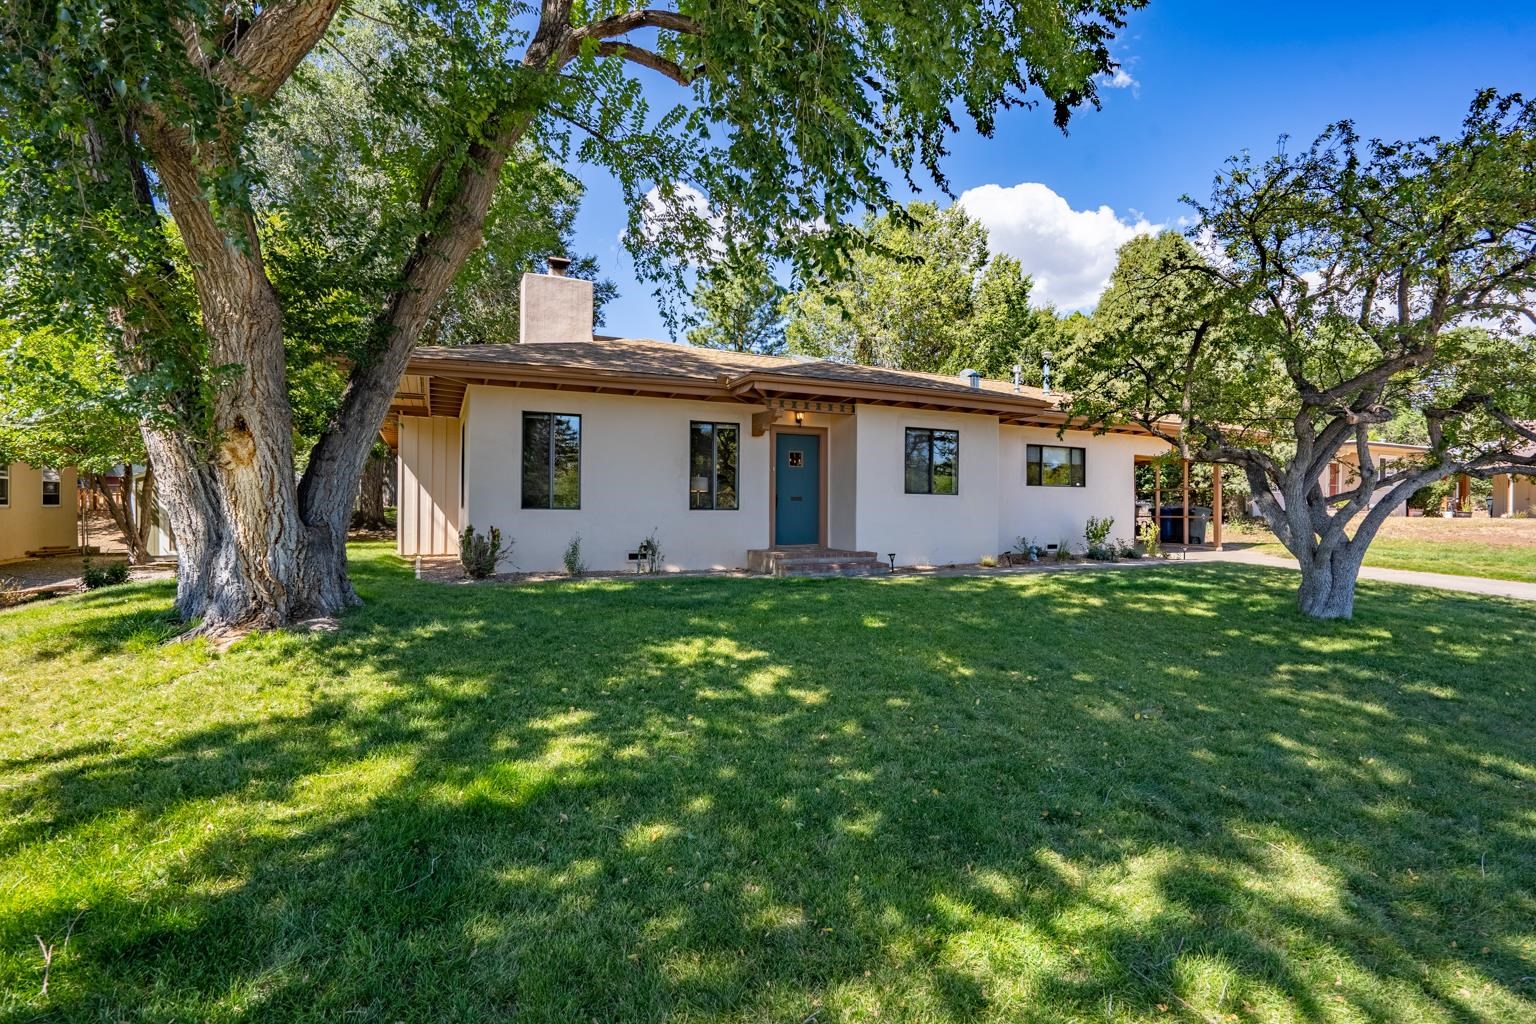 1445 42ND, Los Alamos, New Mexico 87544, 3 Bedrooms Bedrooms, ,2 BathroomsBathrooms,Residential,For Sale,1445 42ND,202104327